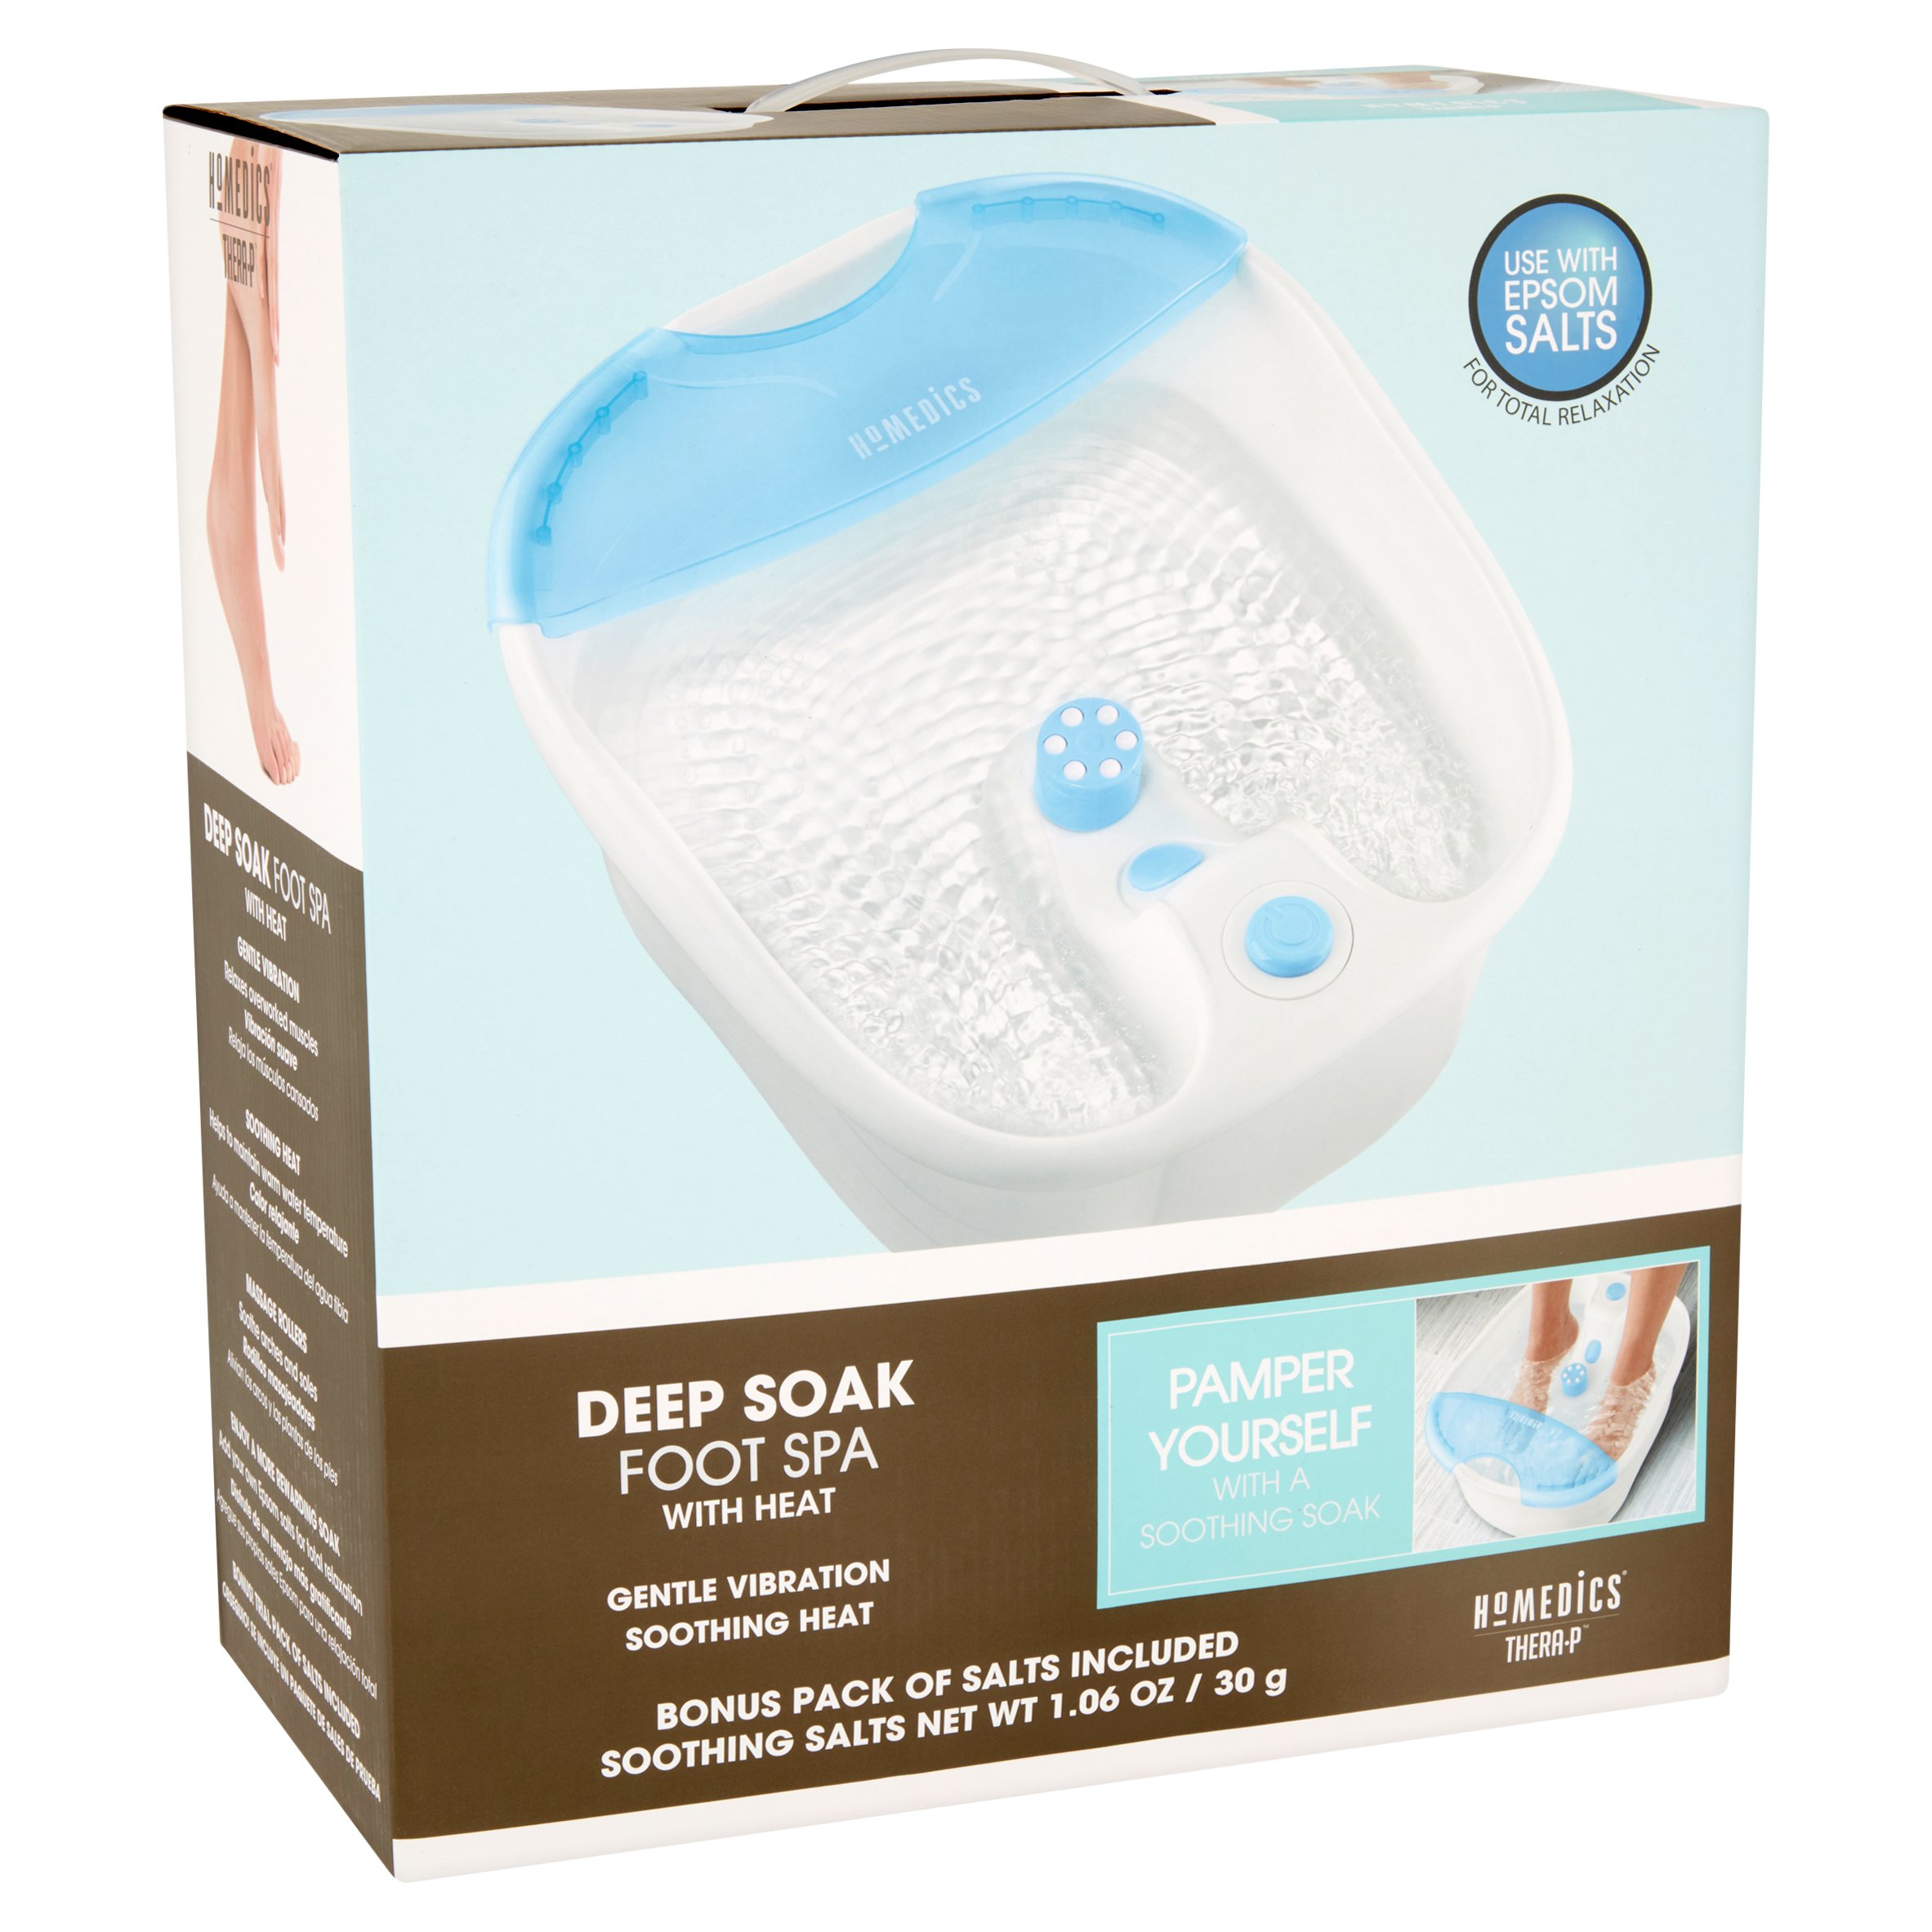 HoMedics Deep Soak Foot Spa with Heat, Designed for use with Epsom Salts FB-65-THP - image 4 of 7